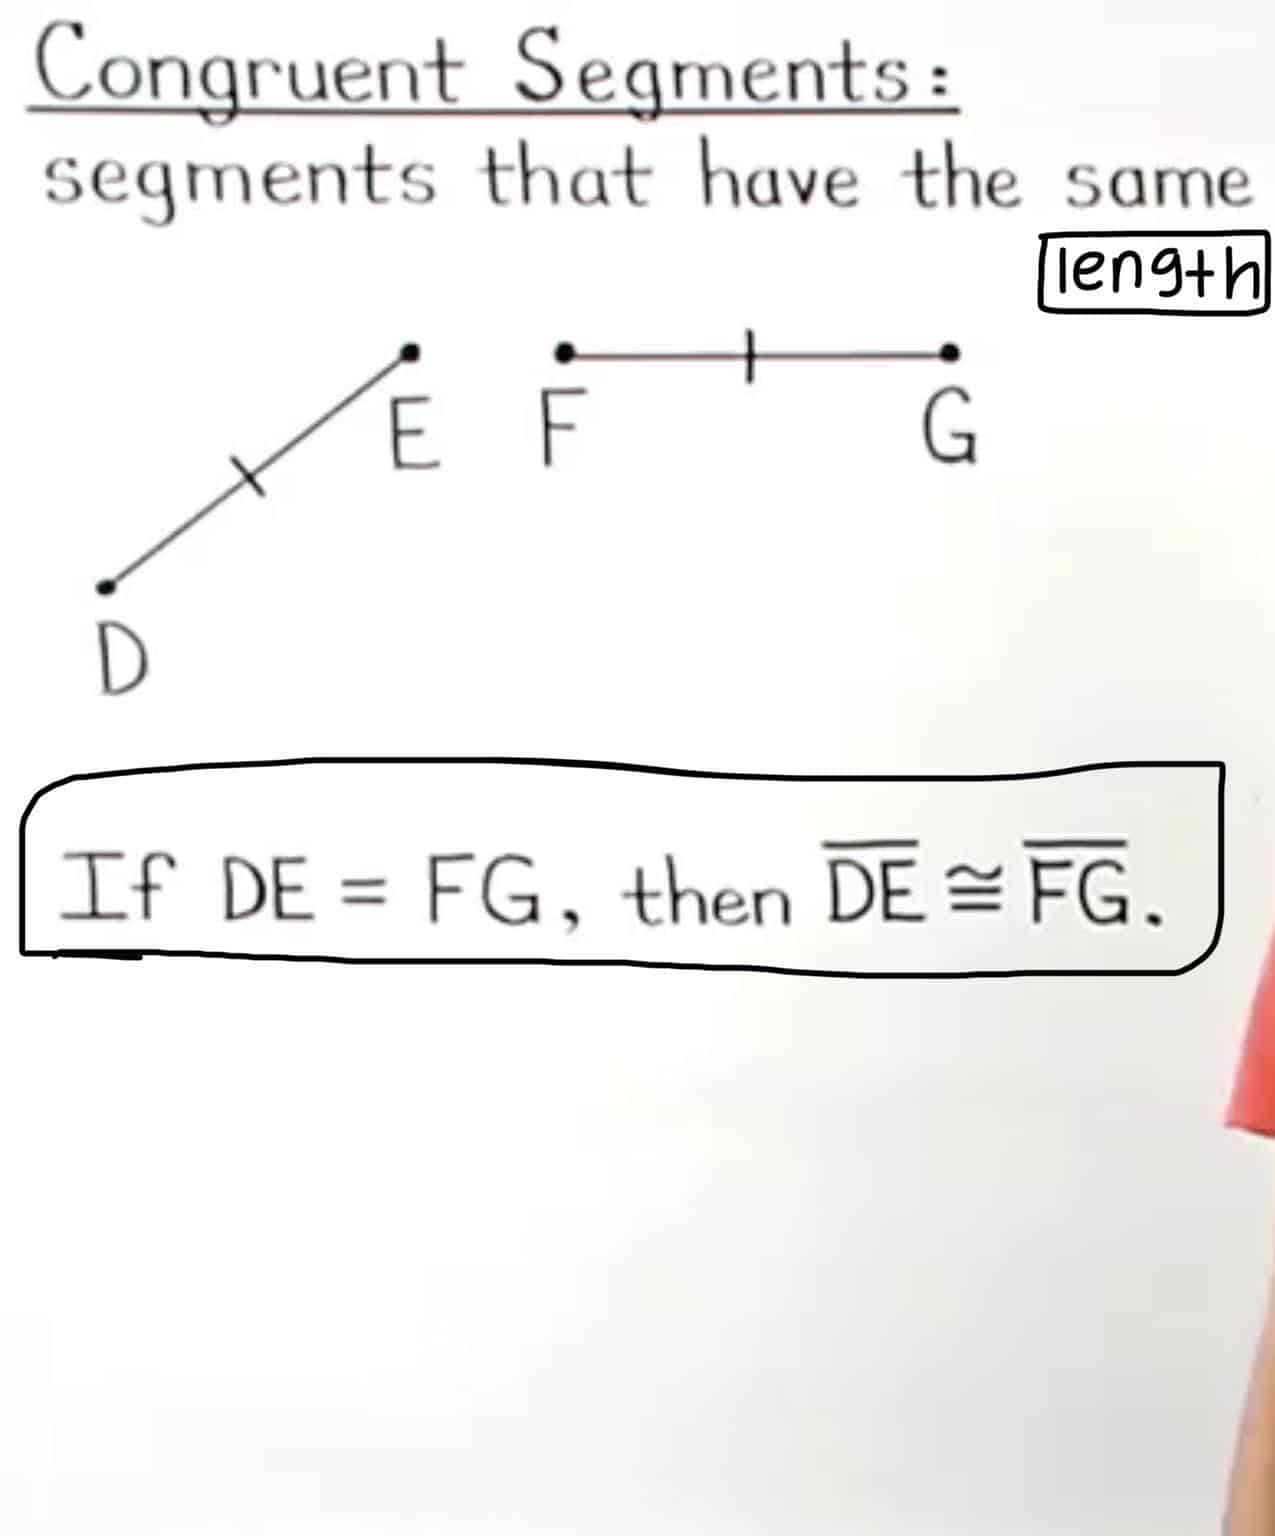 What does it mean for segments to be congruent